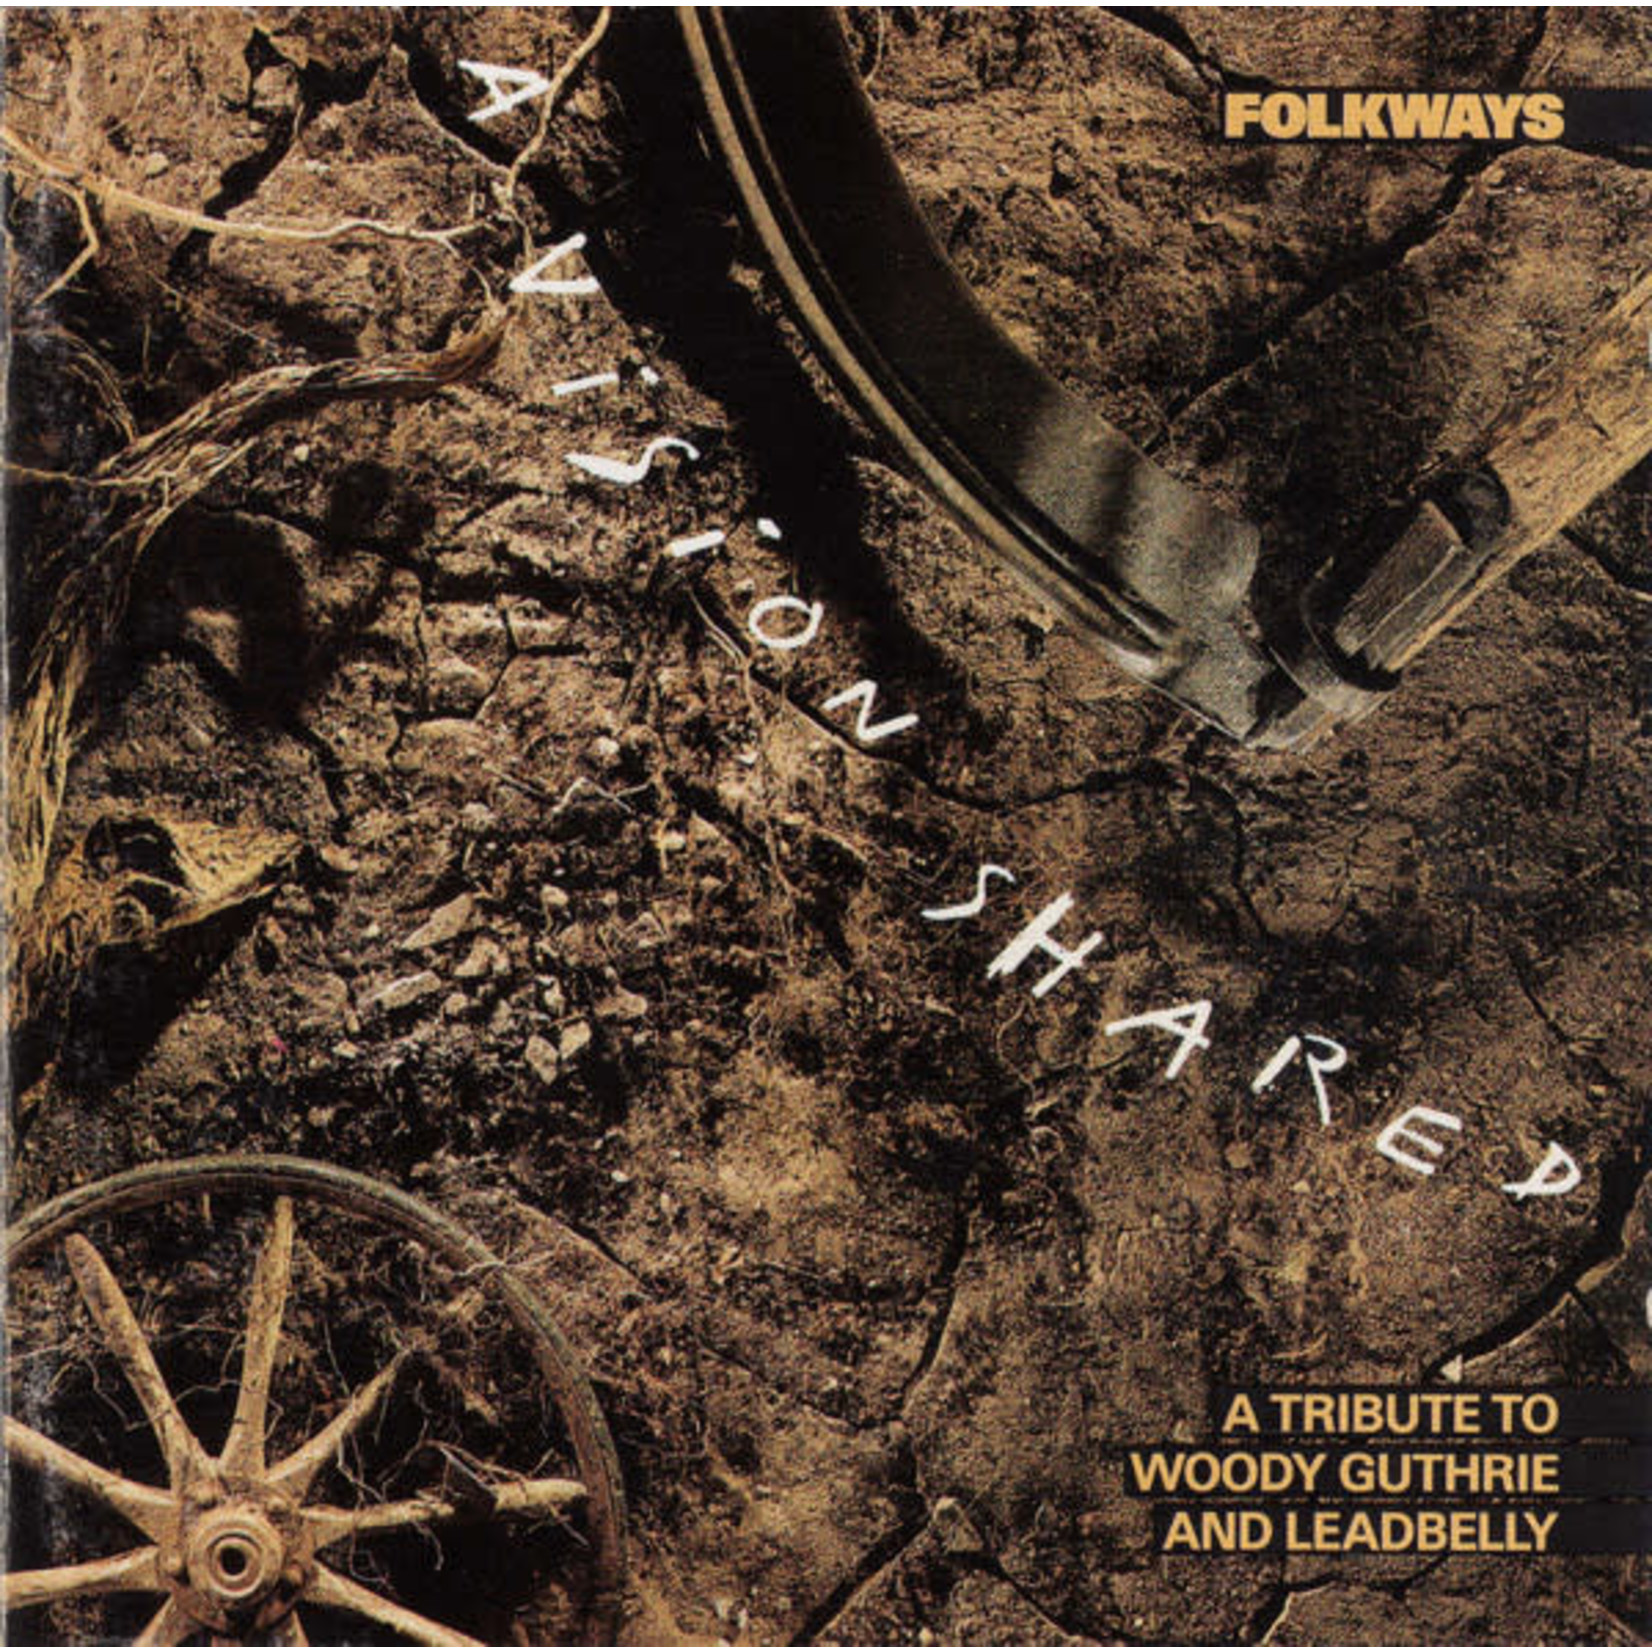 [Vintage] Various Artists - Folkways - A Tribute to Woody Guthrie and Leadbelly